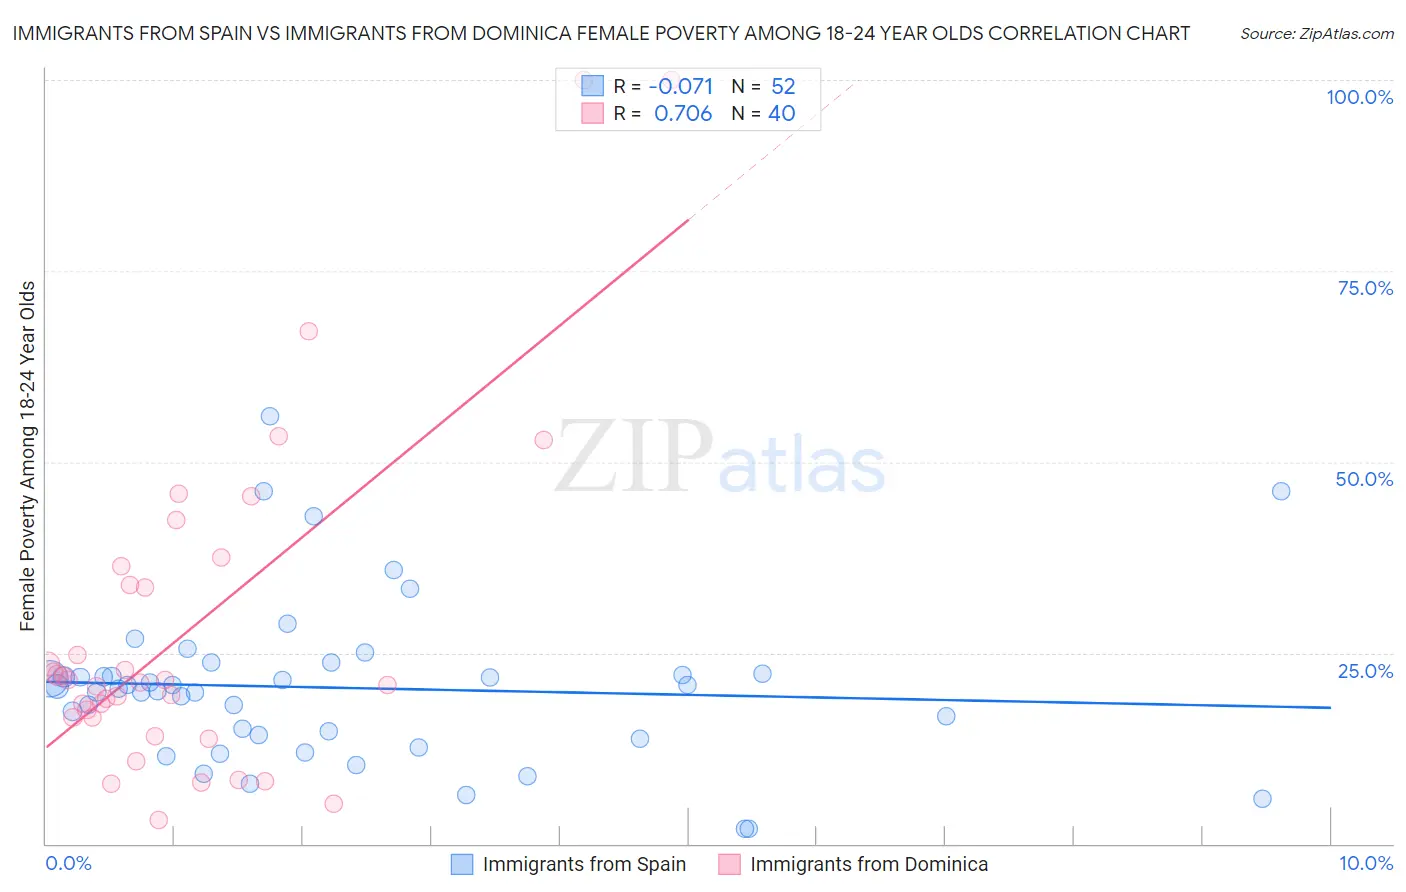 Immigrants from Spain vs Immigrants from Dominica Female Poverty Among 18-24 Year Olds